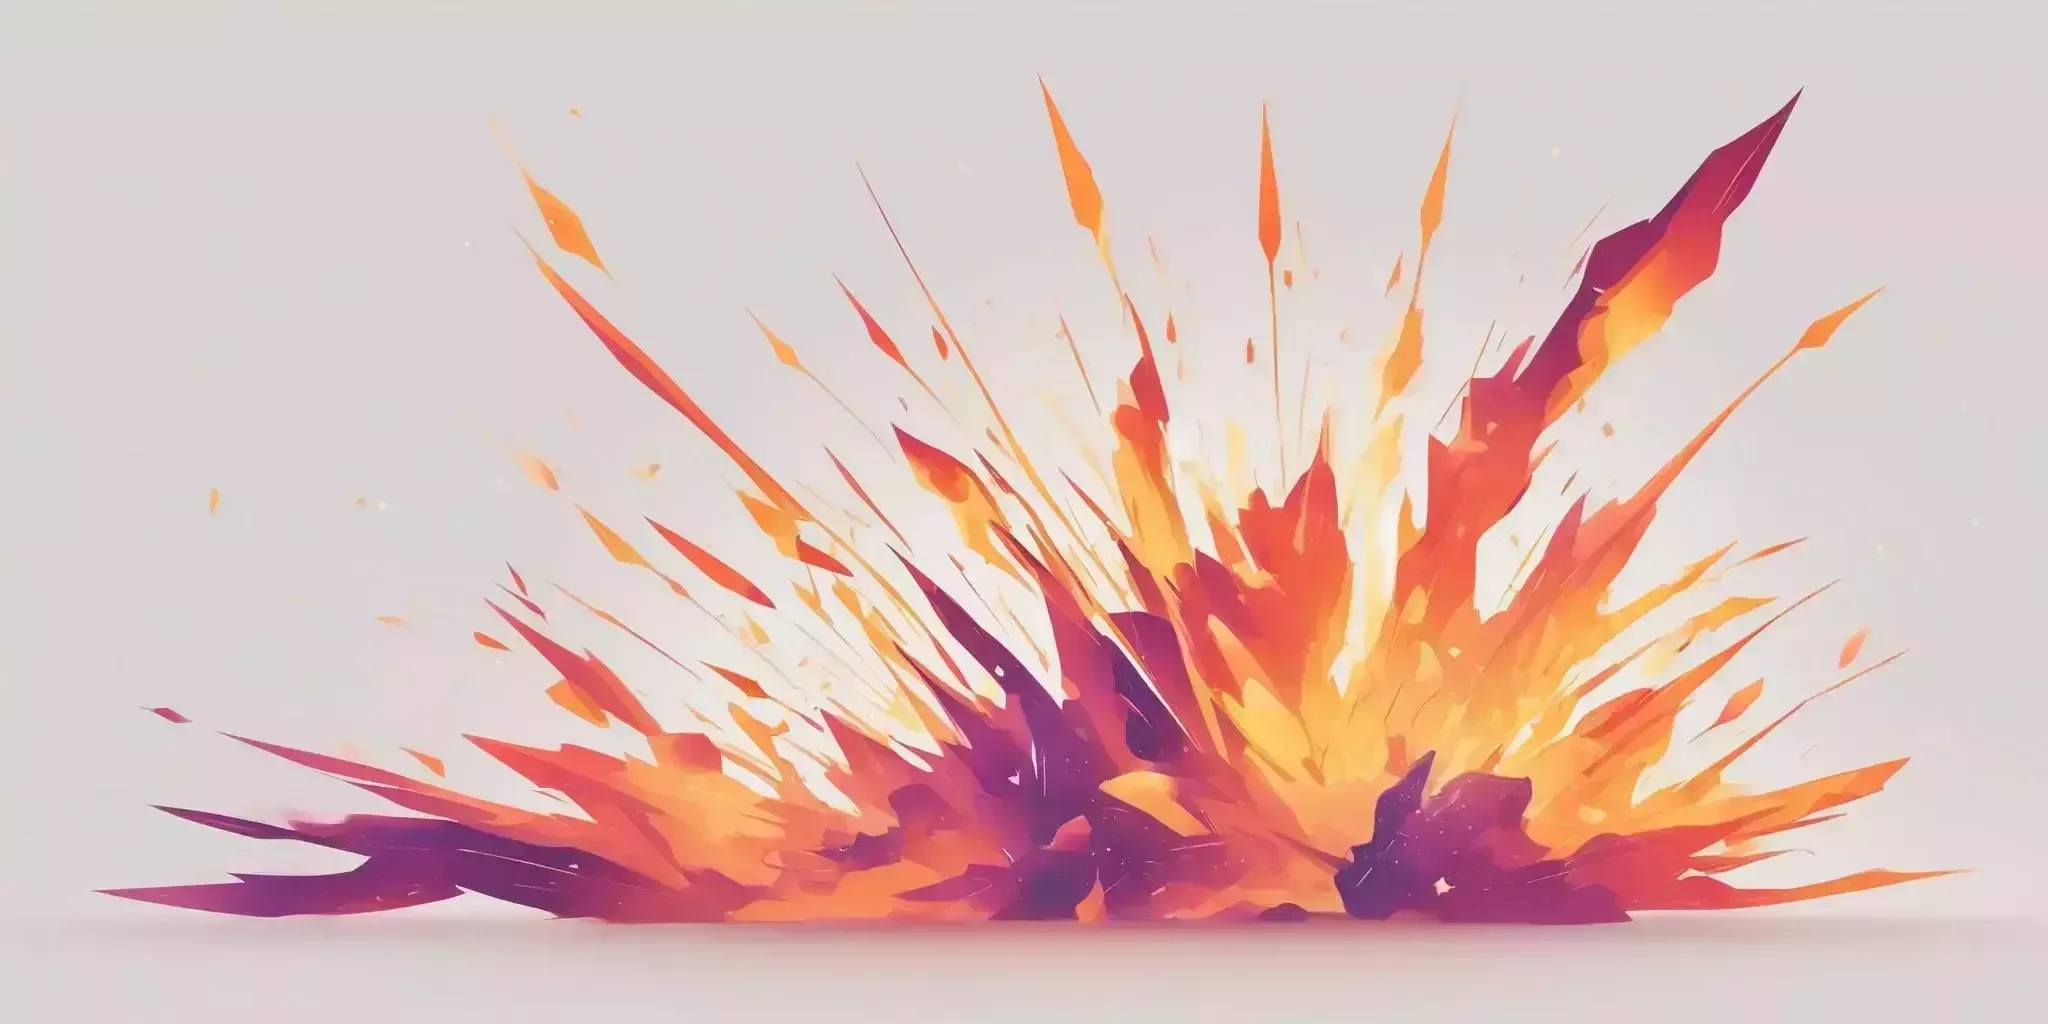 spark in illustration style with gradients and white background